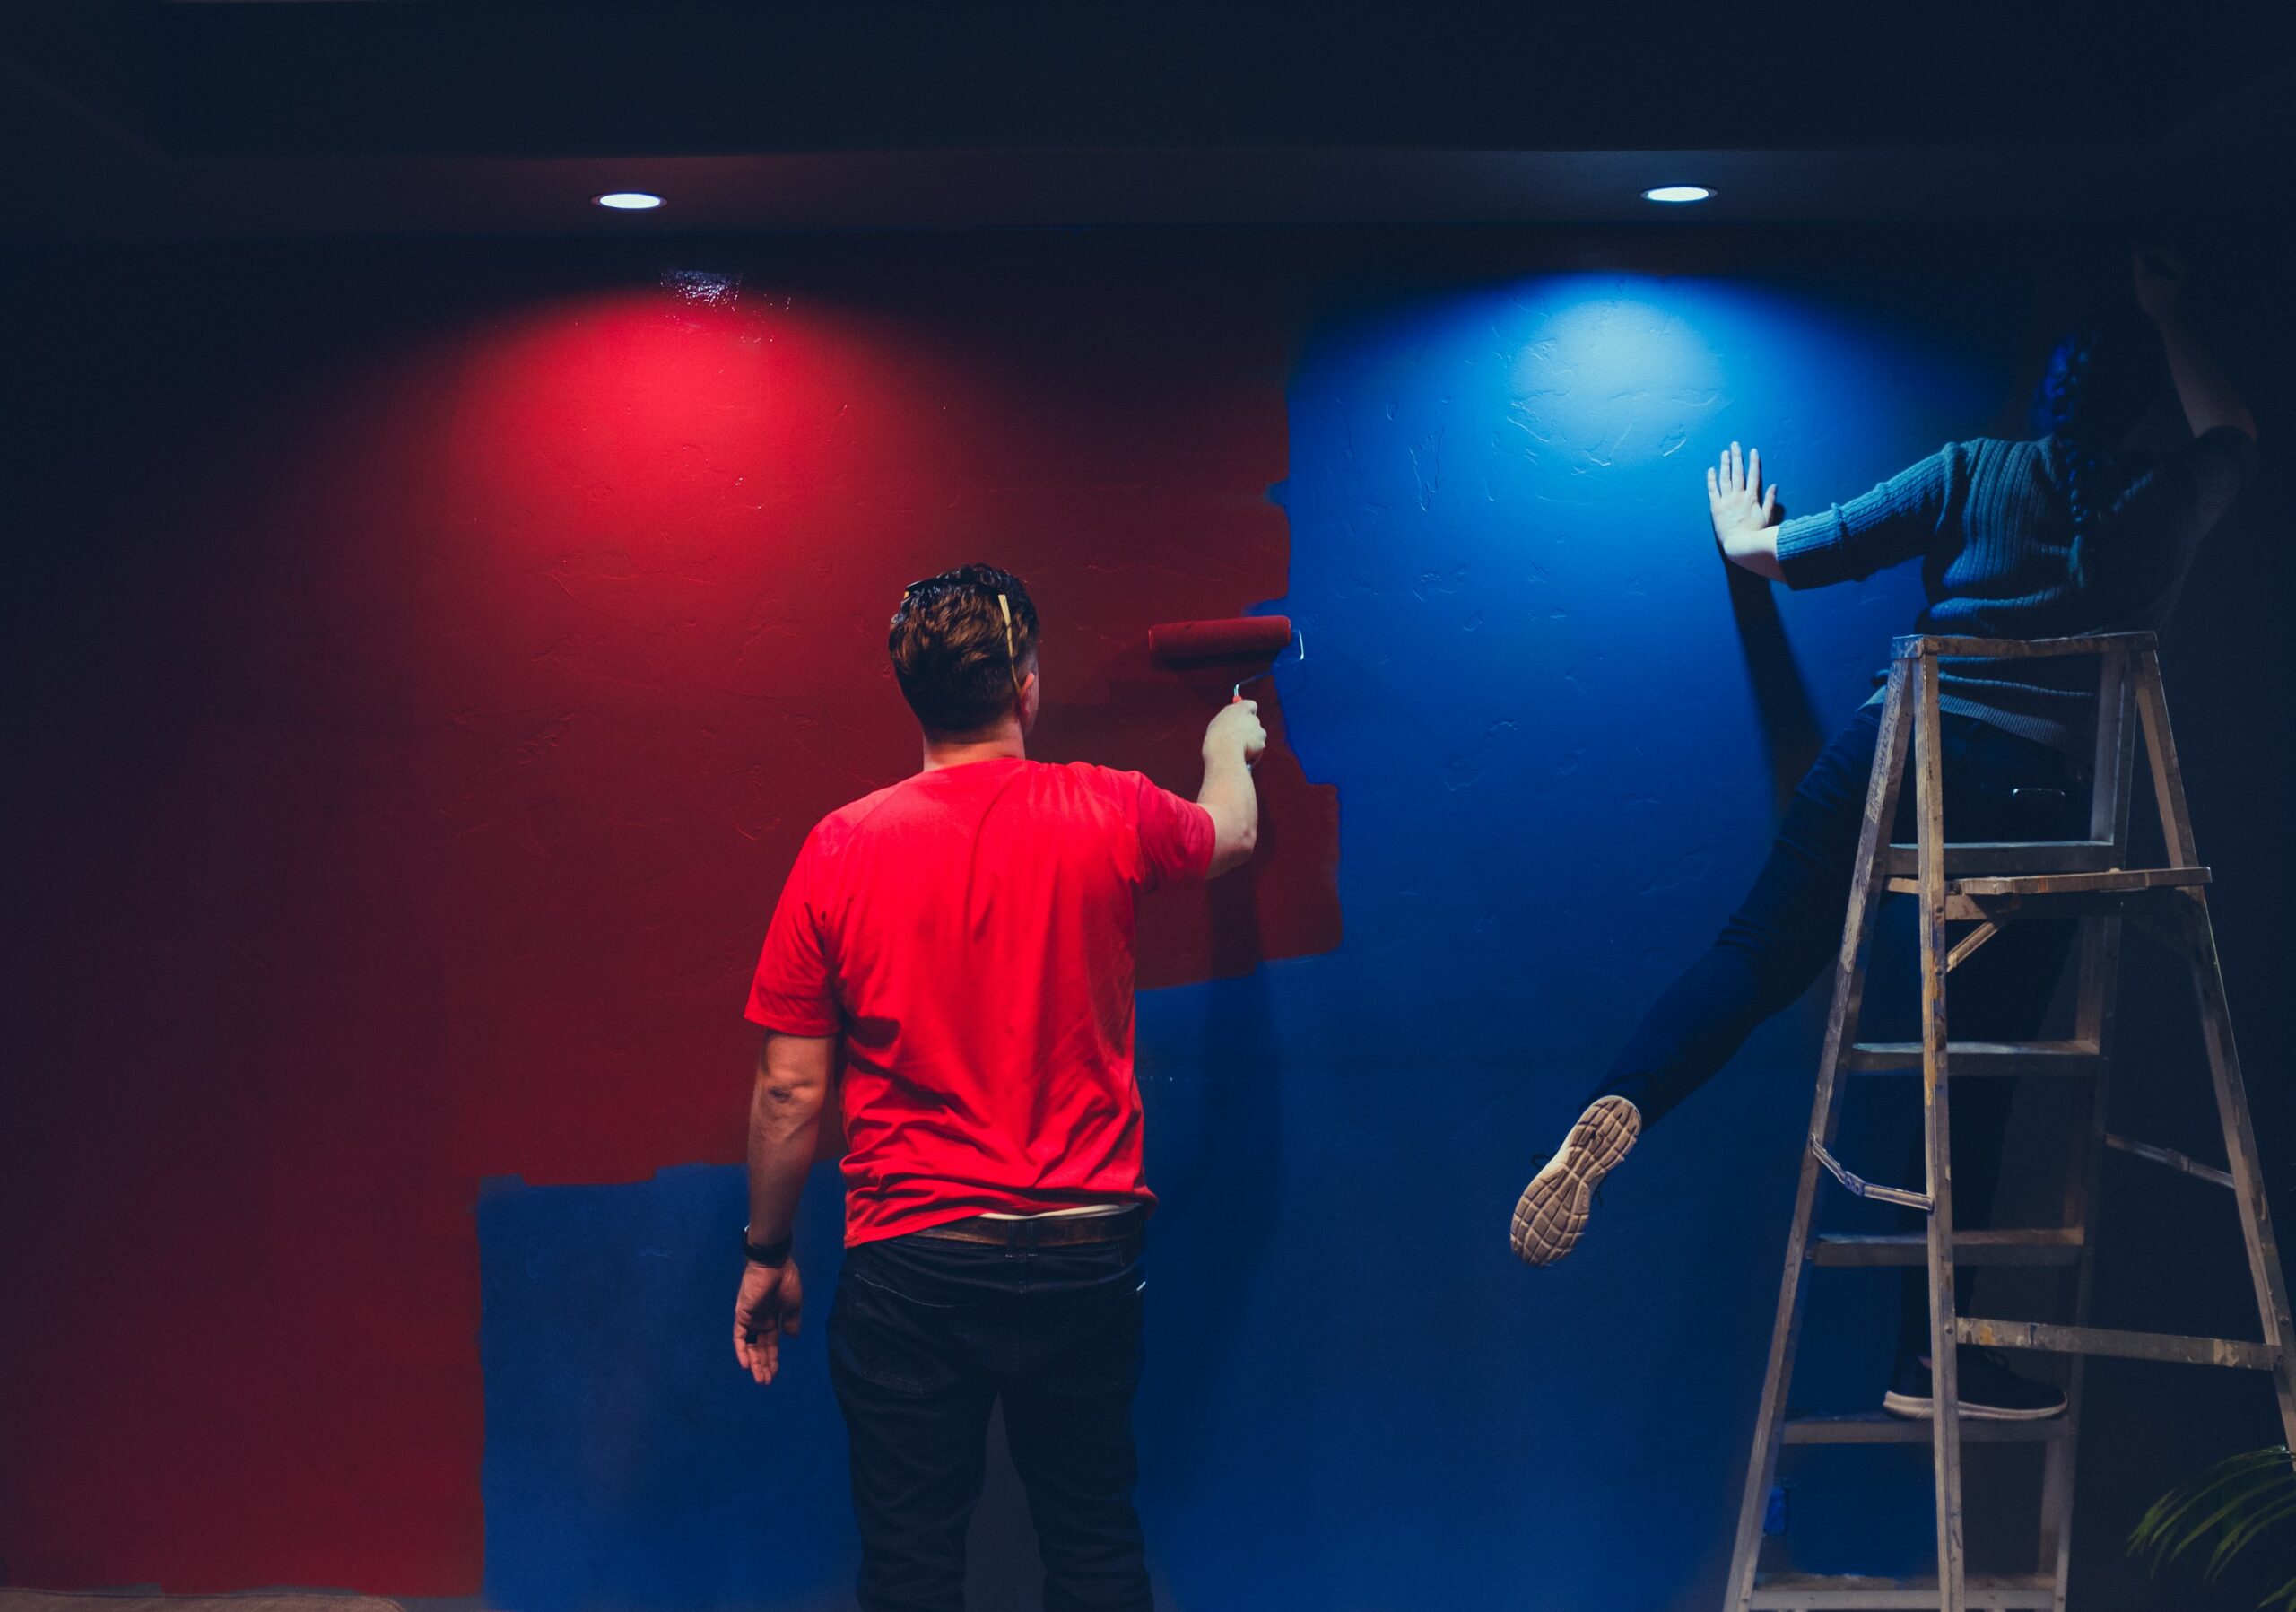 Photo of 2 men painting a wall in red and blue